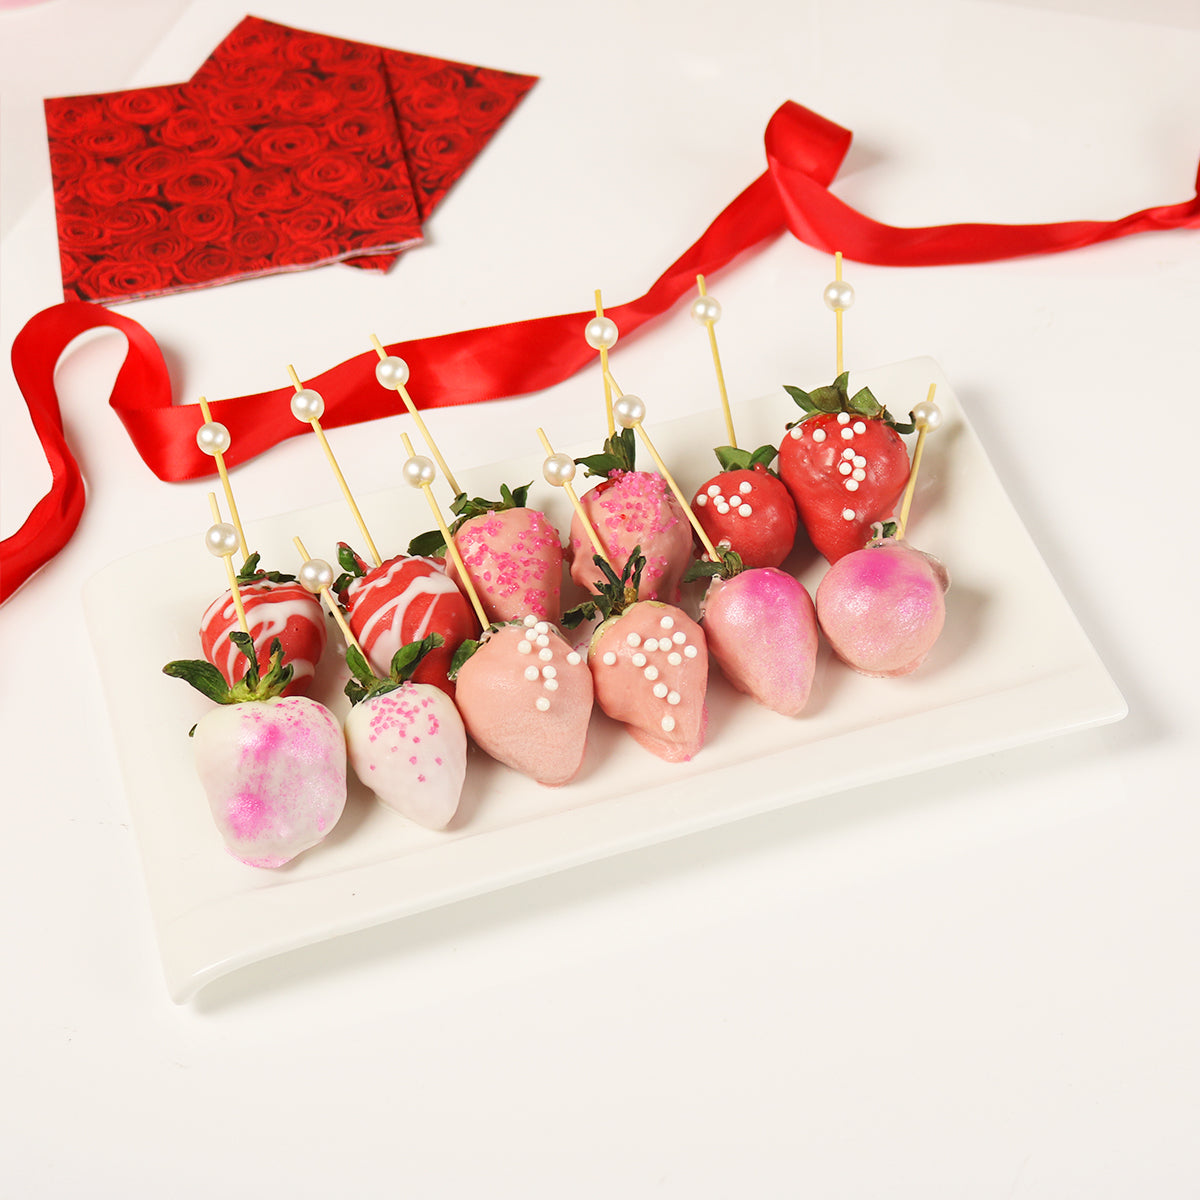 Decorated  Strawberries for a Romantic Valentine